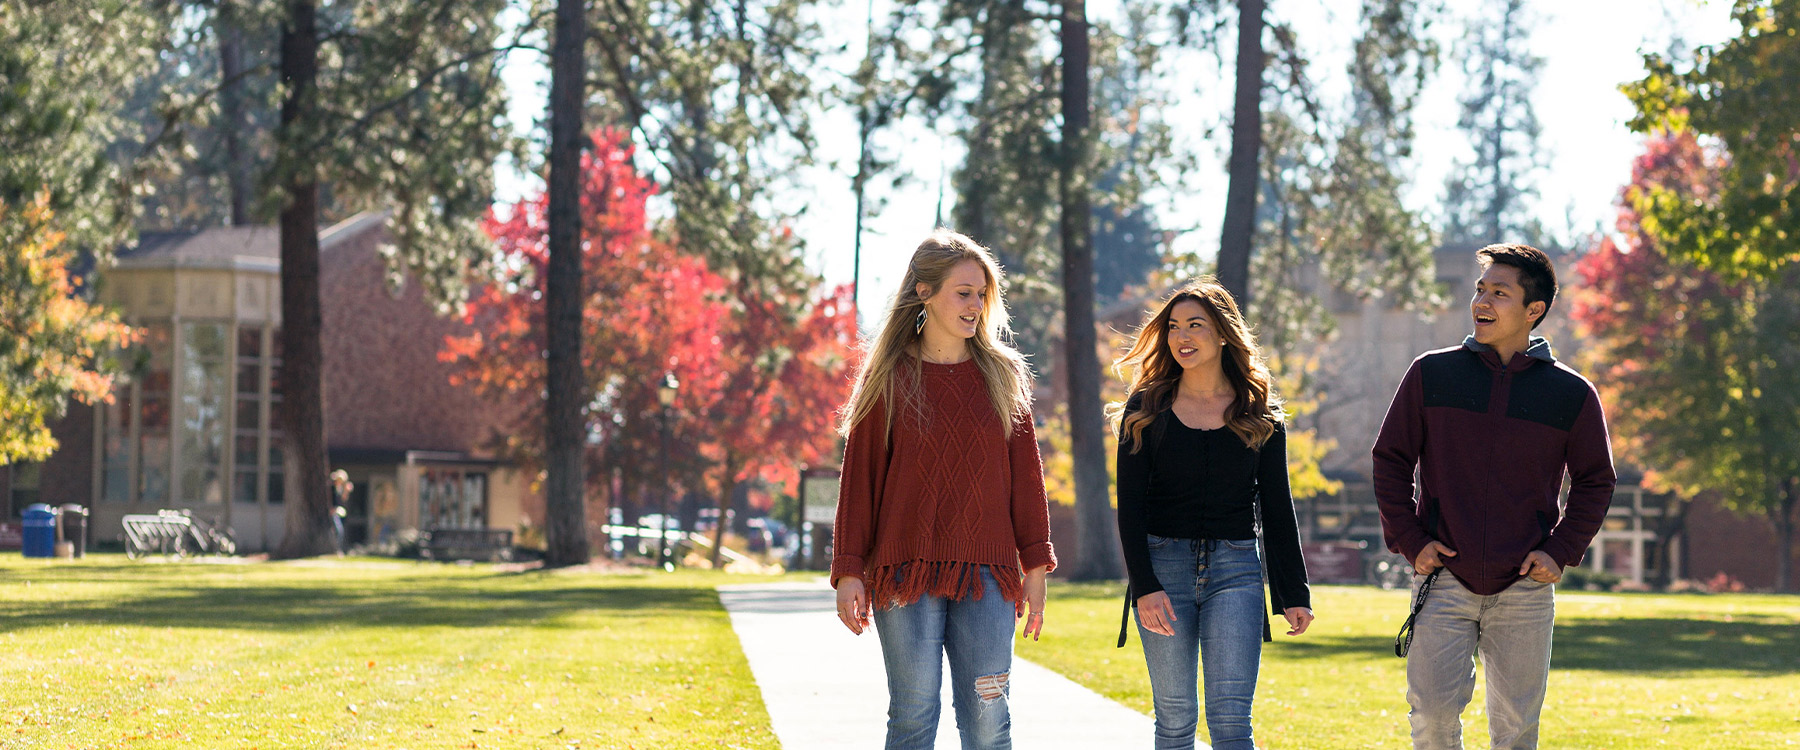 Three students walk outdoors on a tree-lined path with fall foliage, engaged in conversation and smiling.